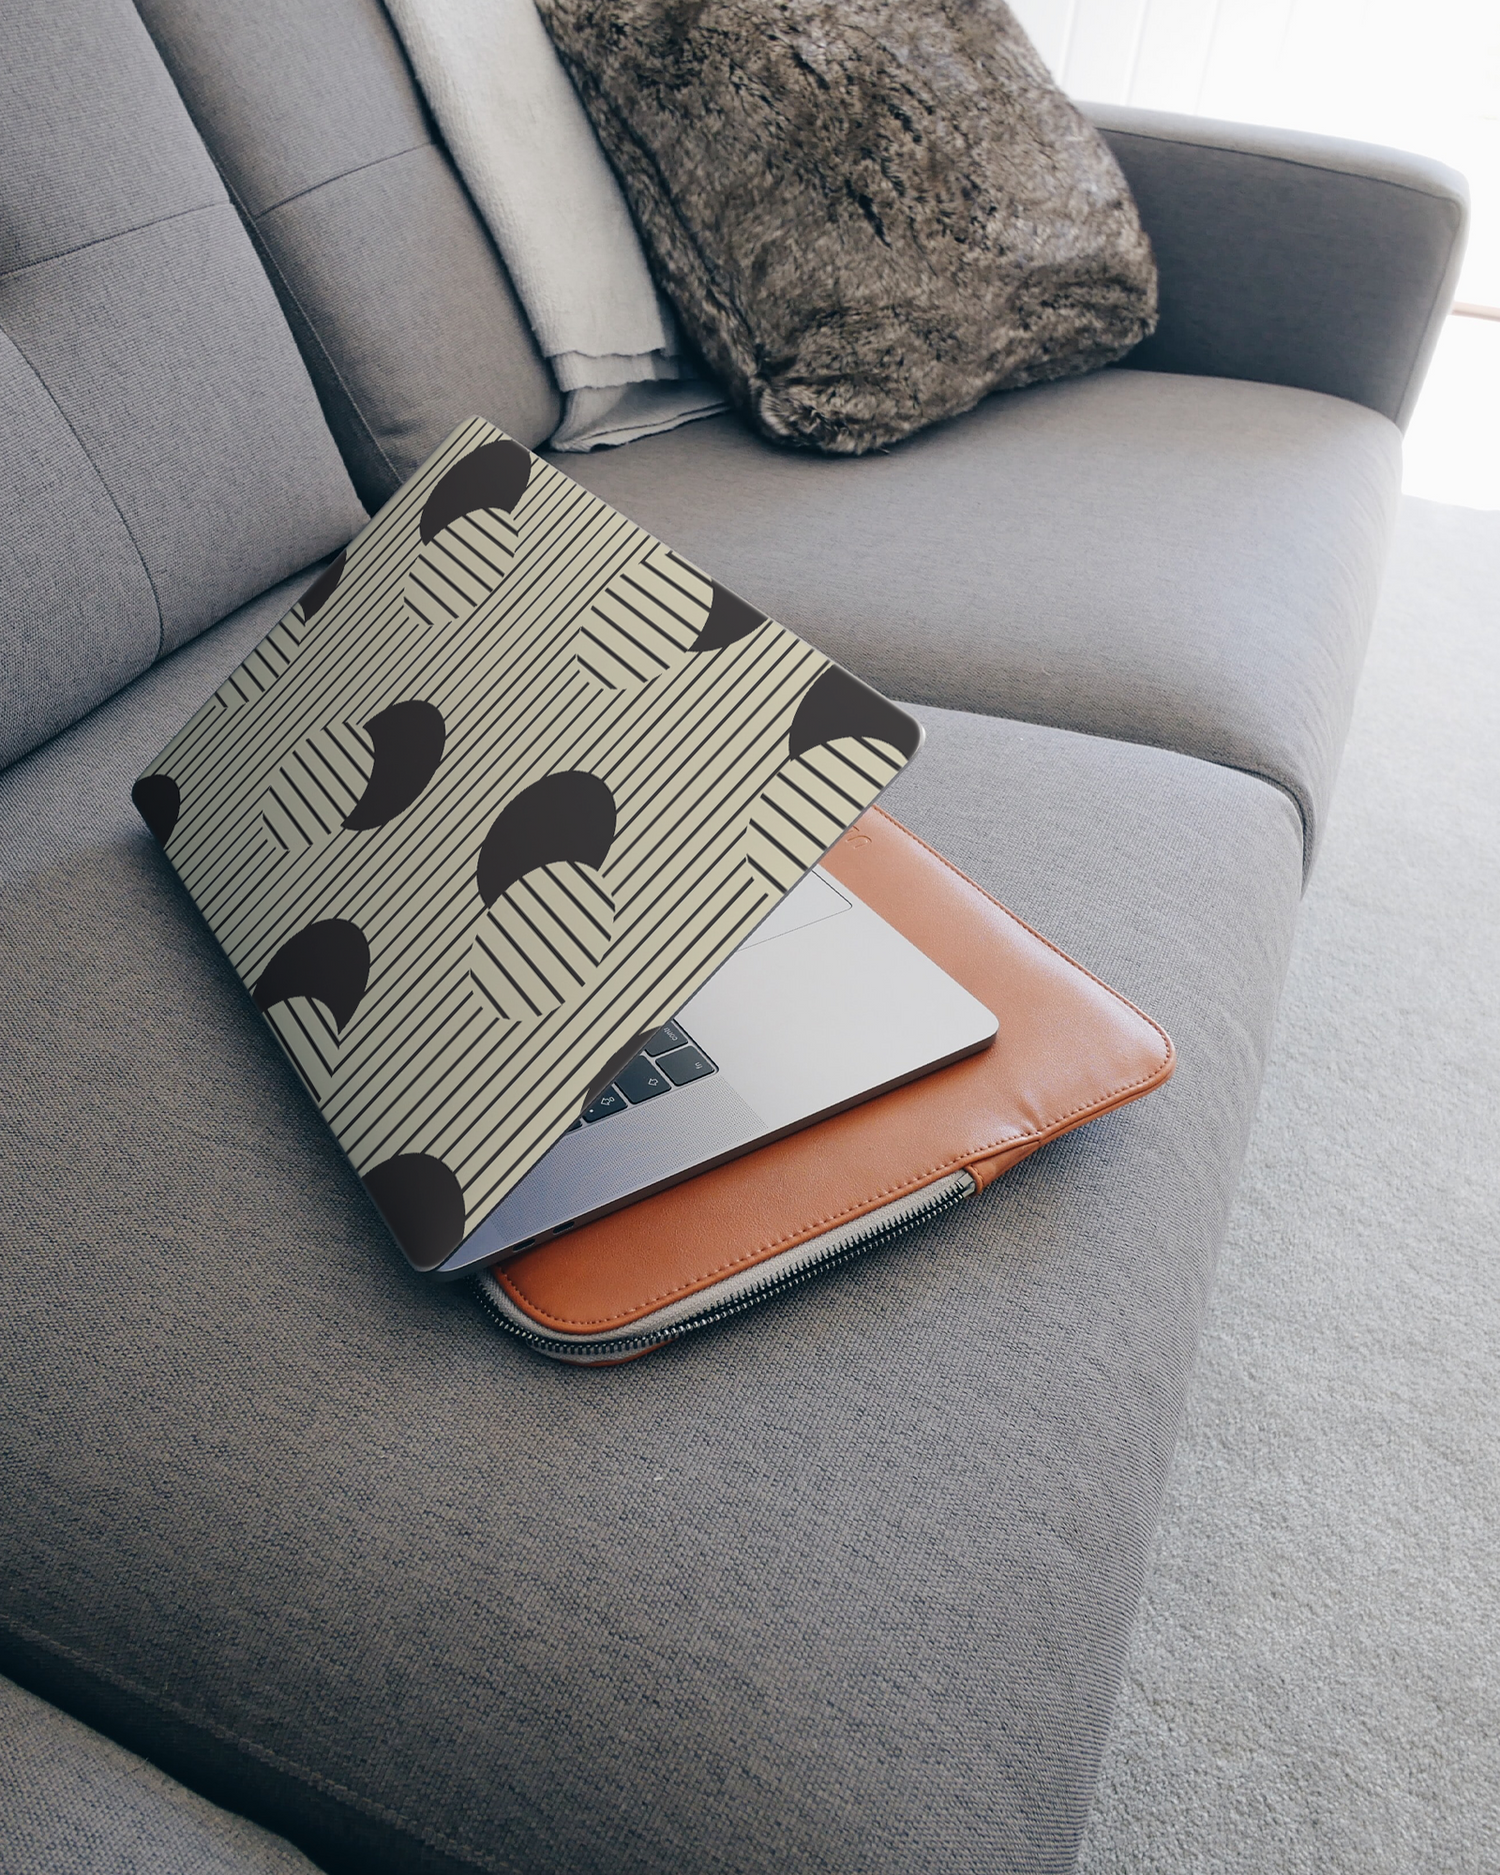 Dot Optics Laptop Skin for 15 inch Apple MacBooks on a couch